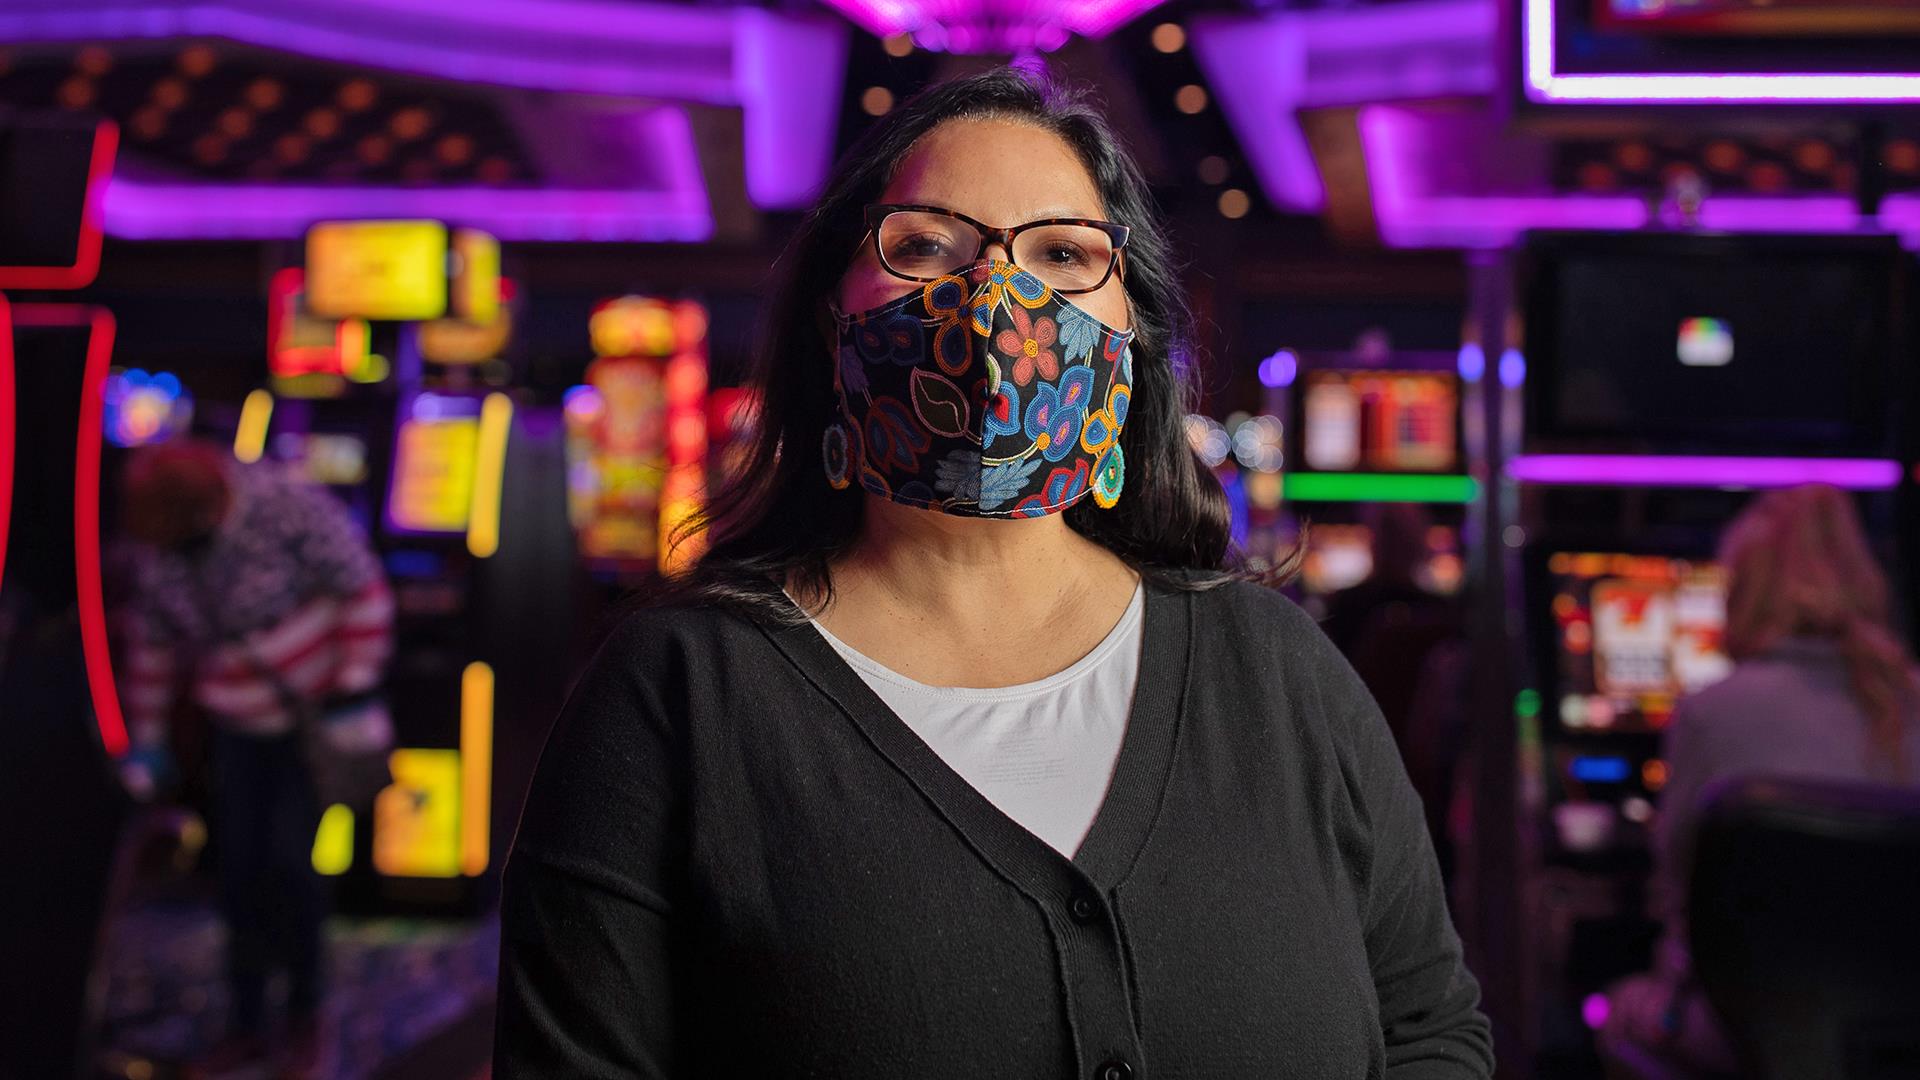 Masks required, fewer games, buffet closed: Idaho casino offers ...